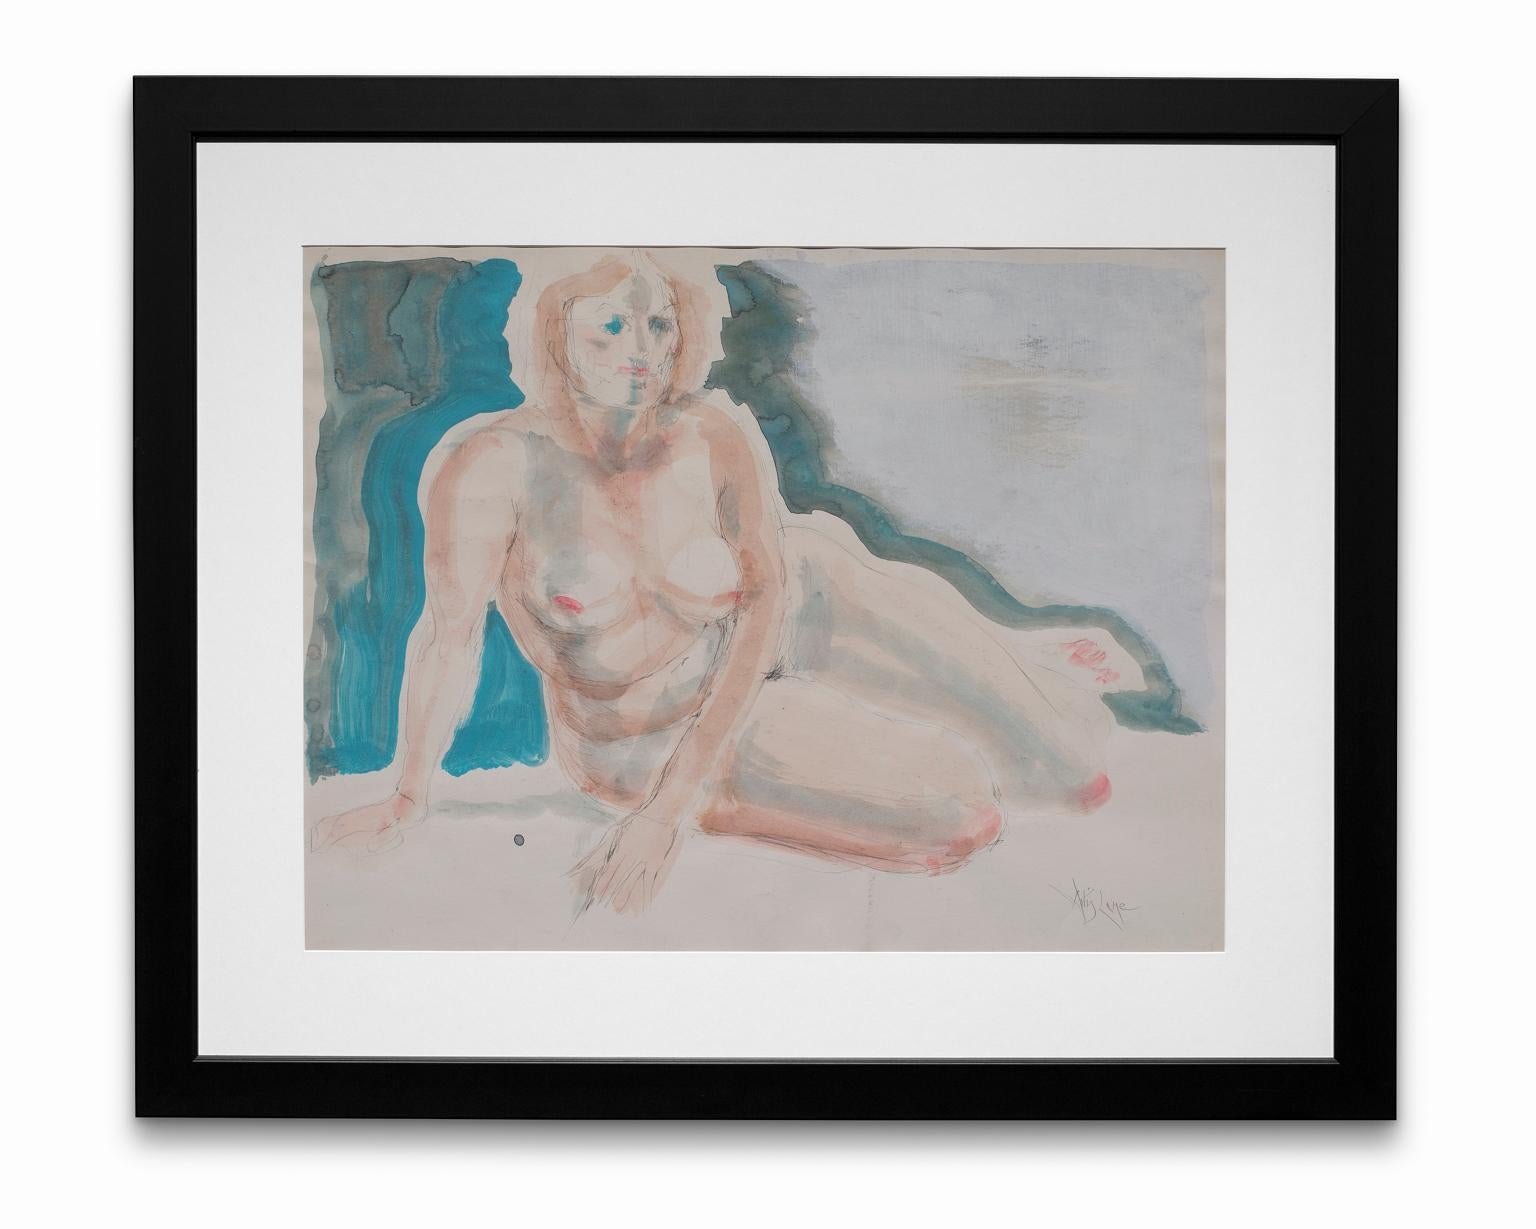 Artis Lane Nude Painting - "Blue Nude", Watercolor and Graphite on Paper